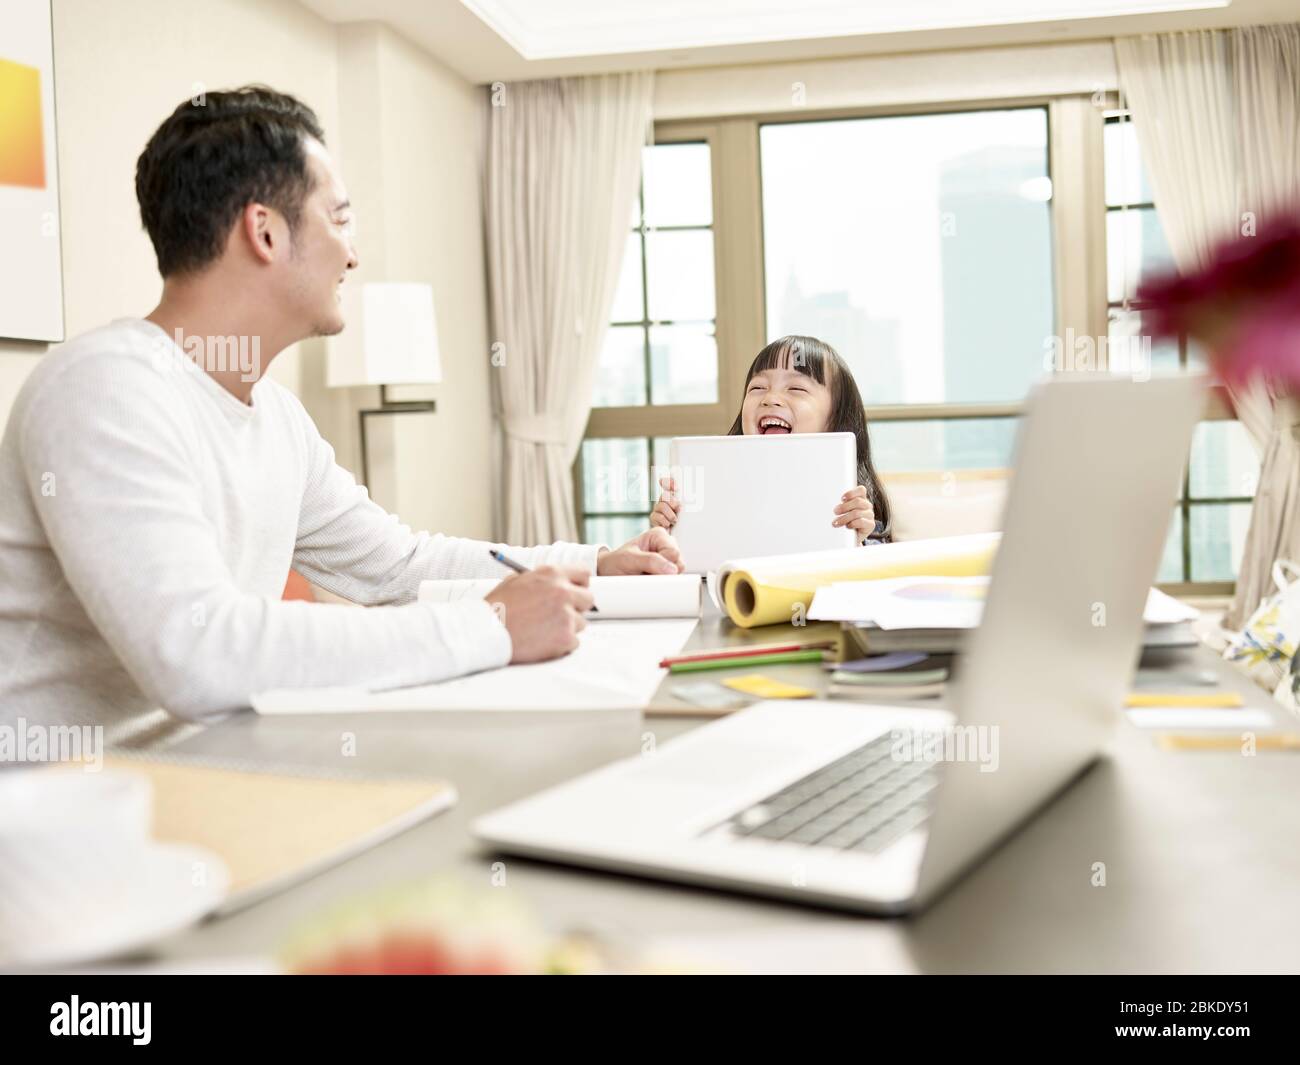 young asian man freelance designer taking care of child while working from home (artwork in background digitally altered) Stock Photo